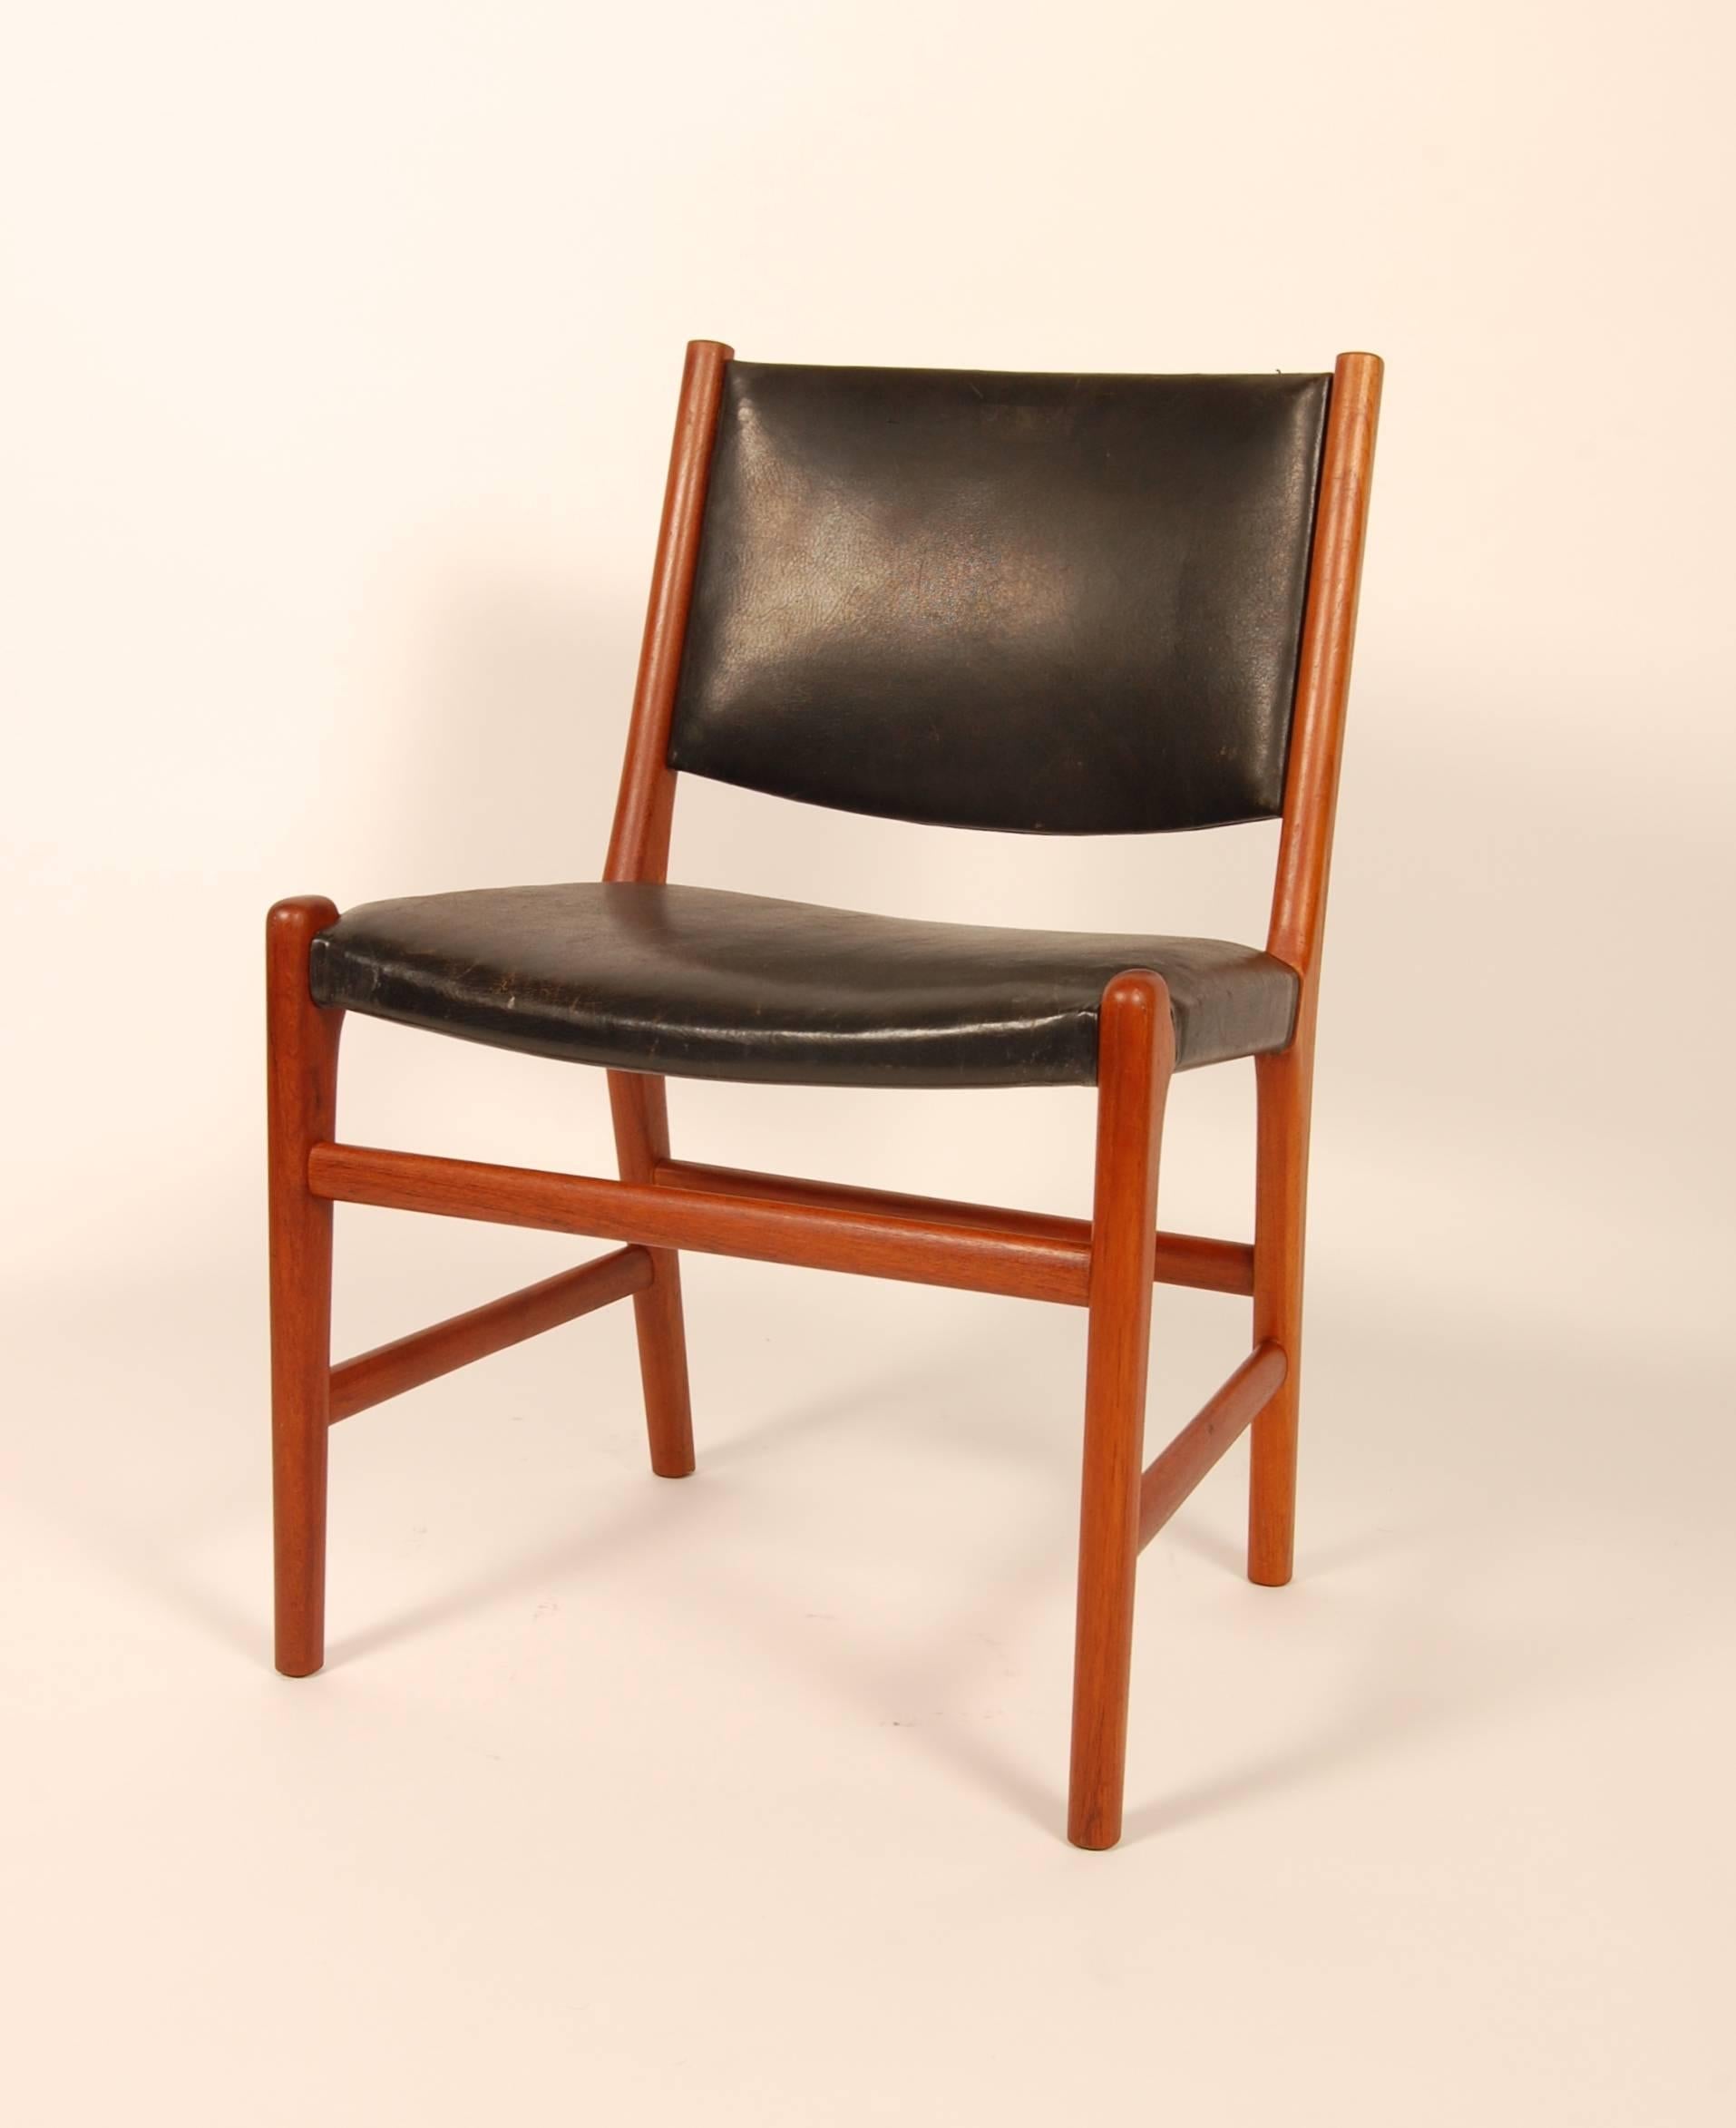 All original condition Hans Wegner for Johannes Hansen side or dining chair in a richly age toned teak with patinated leather upholstery. Straightforward architectural approach to the form with a wide seat and back and excellent comfort geometry.